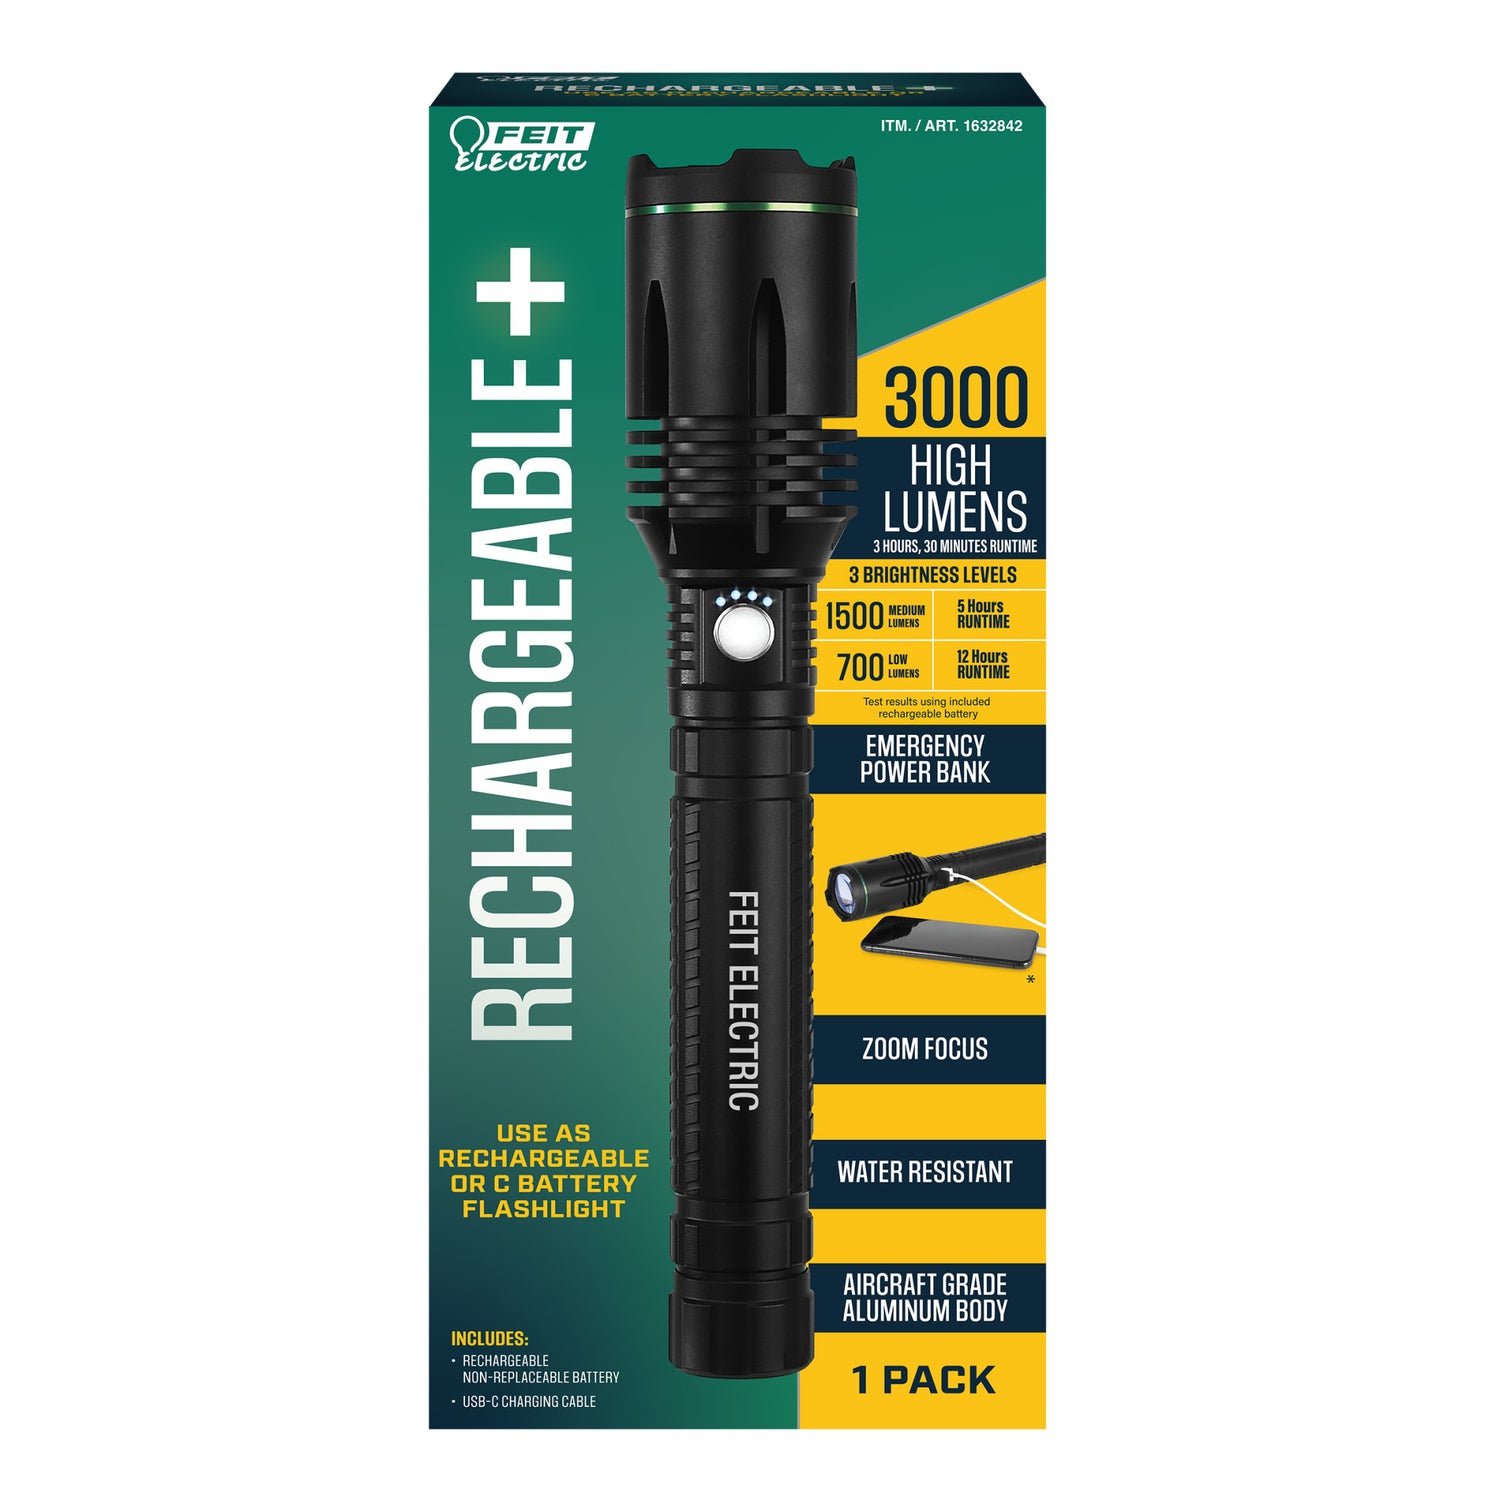 Flashlights for your home emergency kit at Batteries Plus